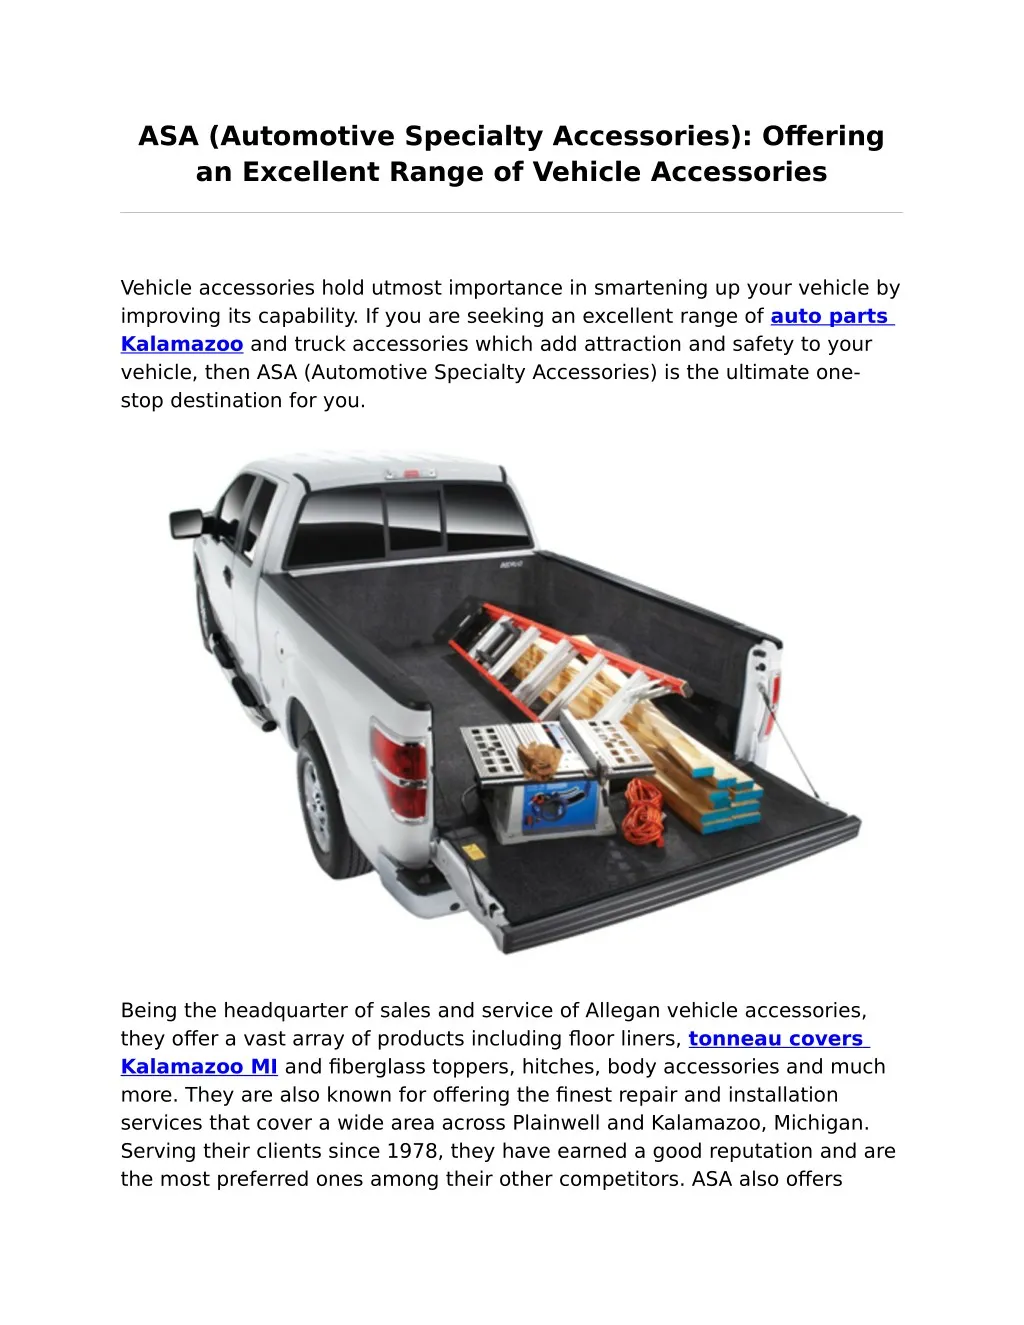 asa automotive specialty accessories offering